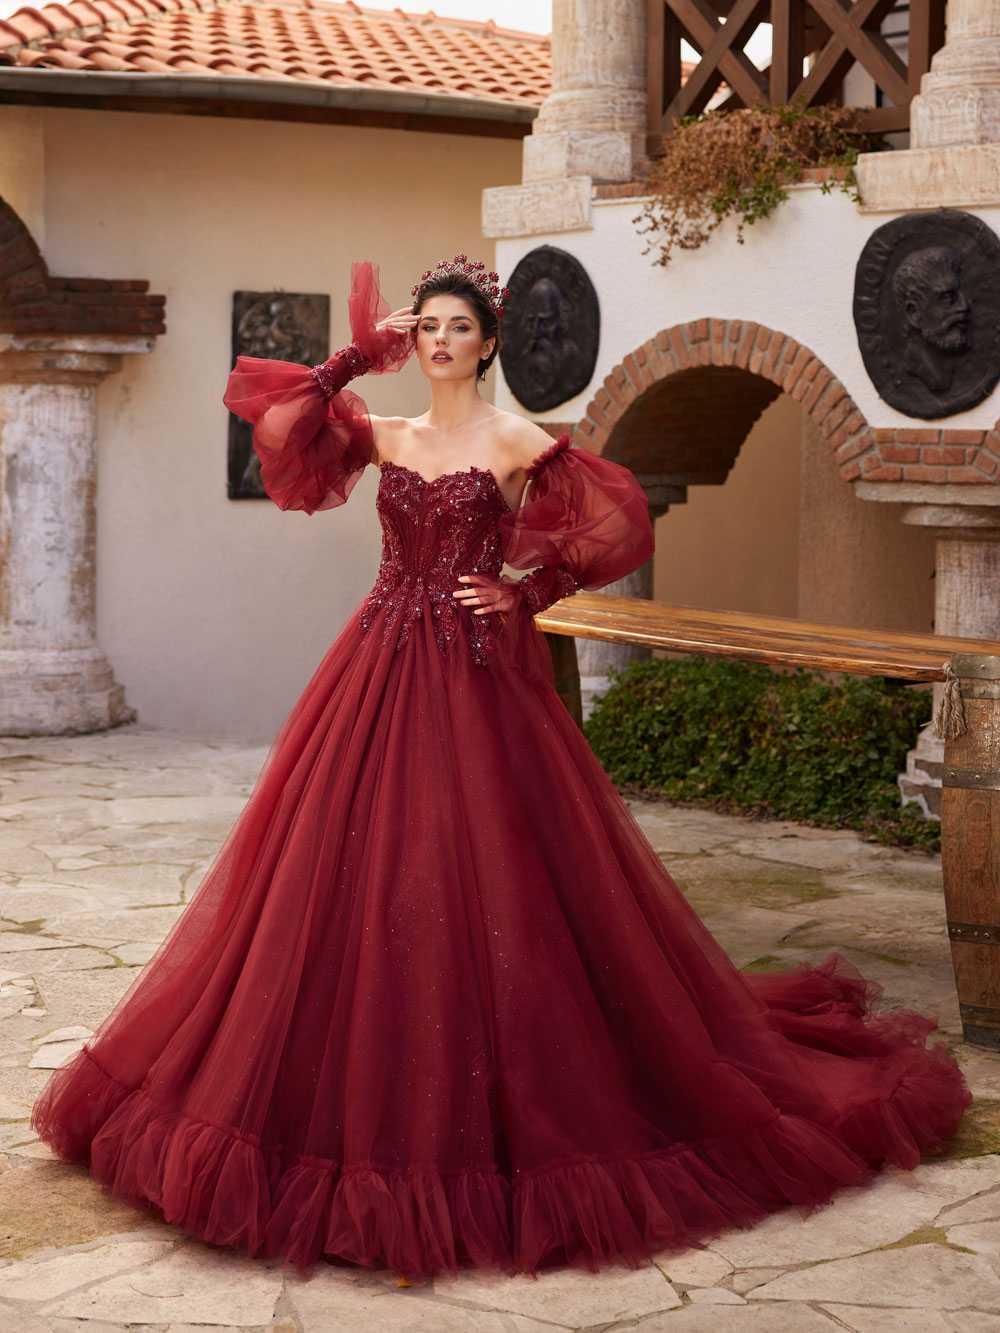 buy chic elegant wedding party prom party Maroon Strapless Bodice Sequin Embellished Tulle Long Ball Gown online shop